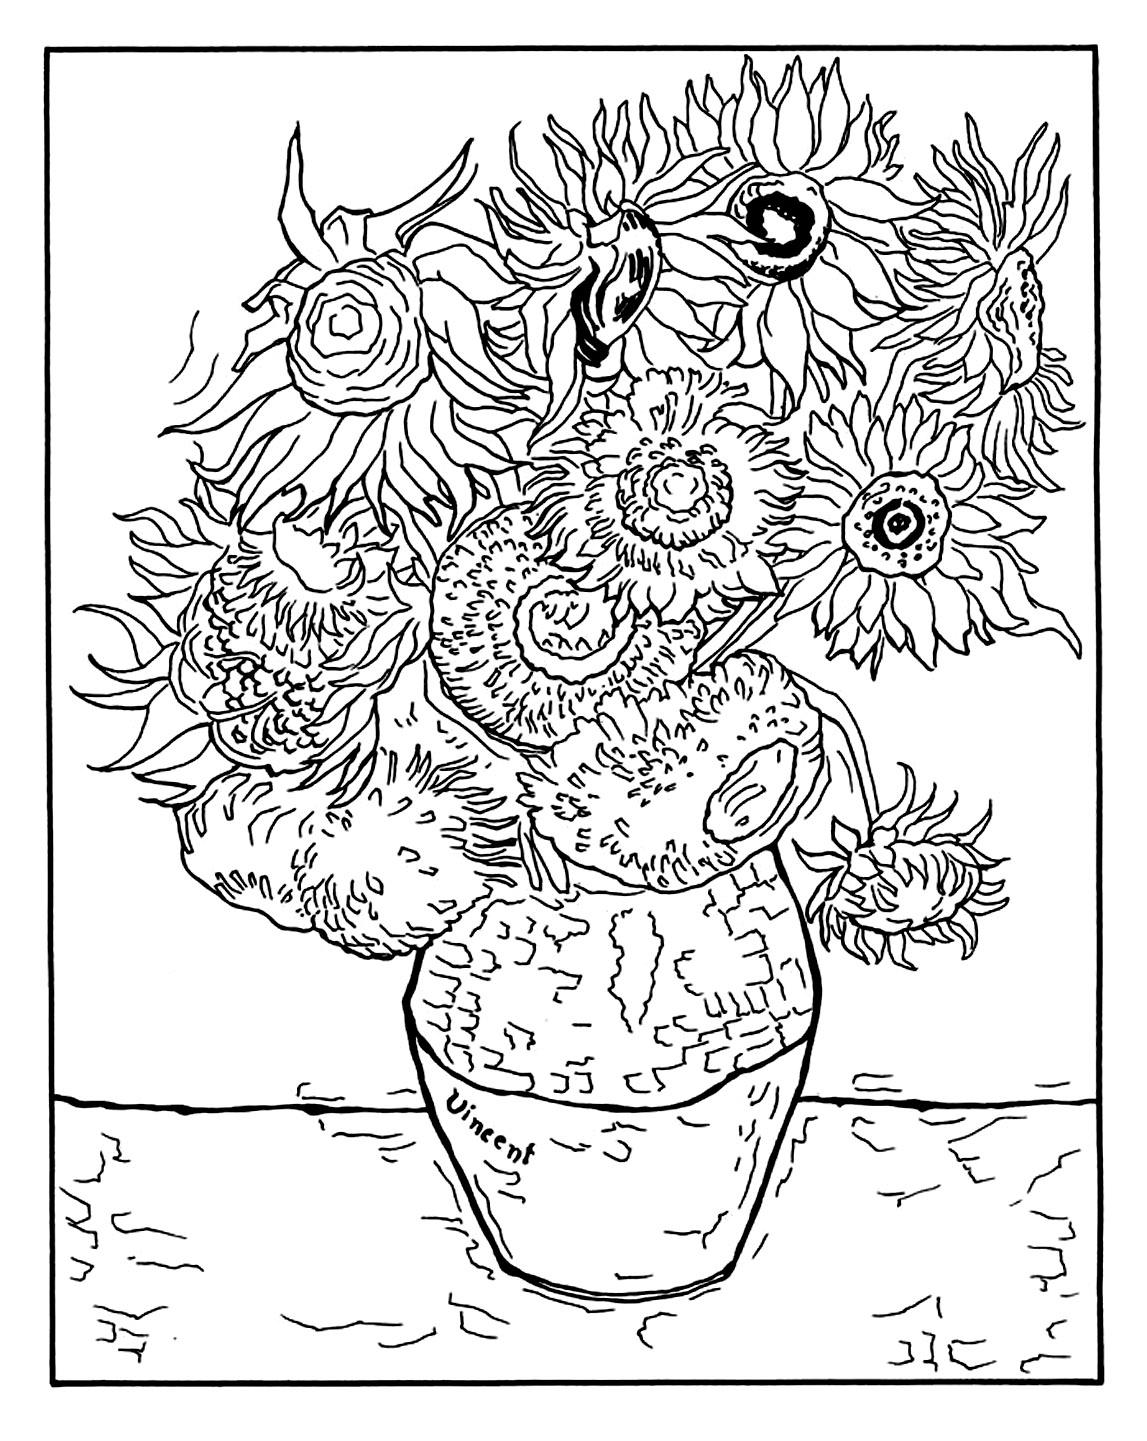 Coloring page created from 'Vase with Twelve Sunflowers' by Vincent Van Gogh